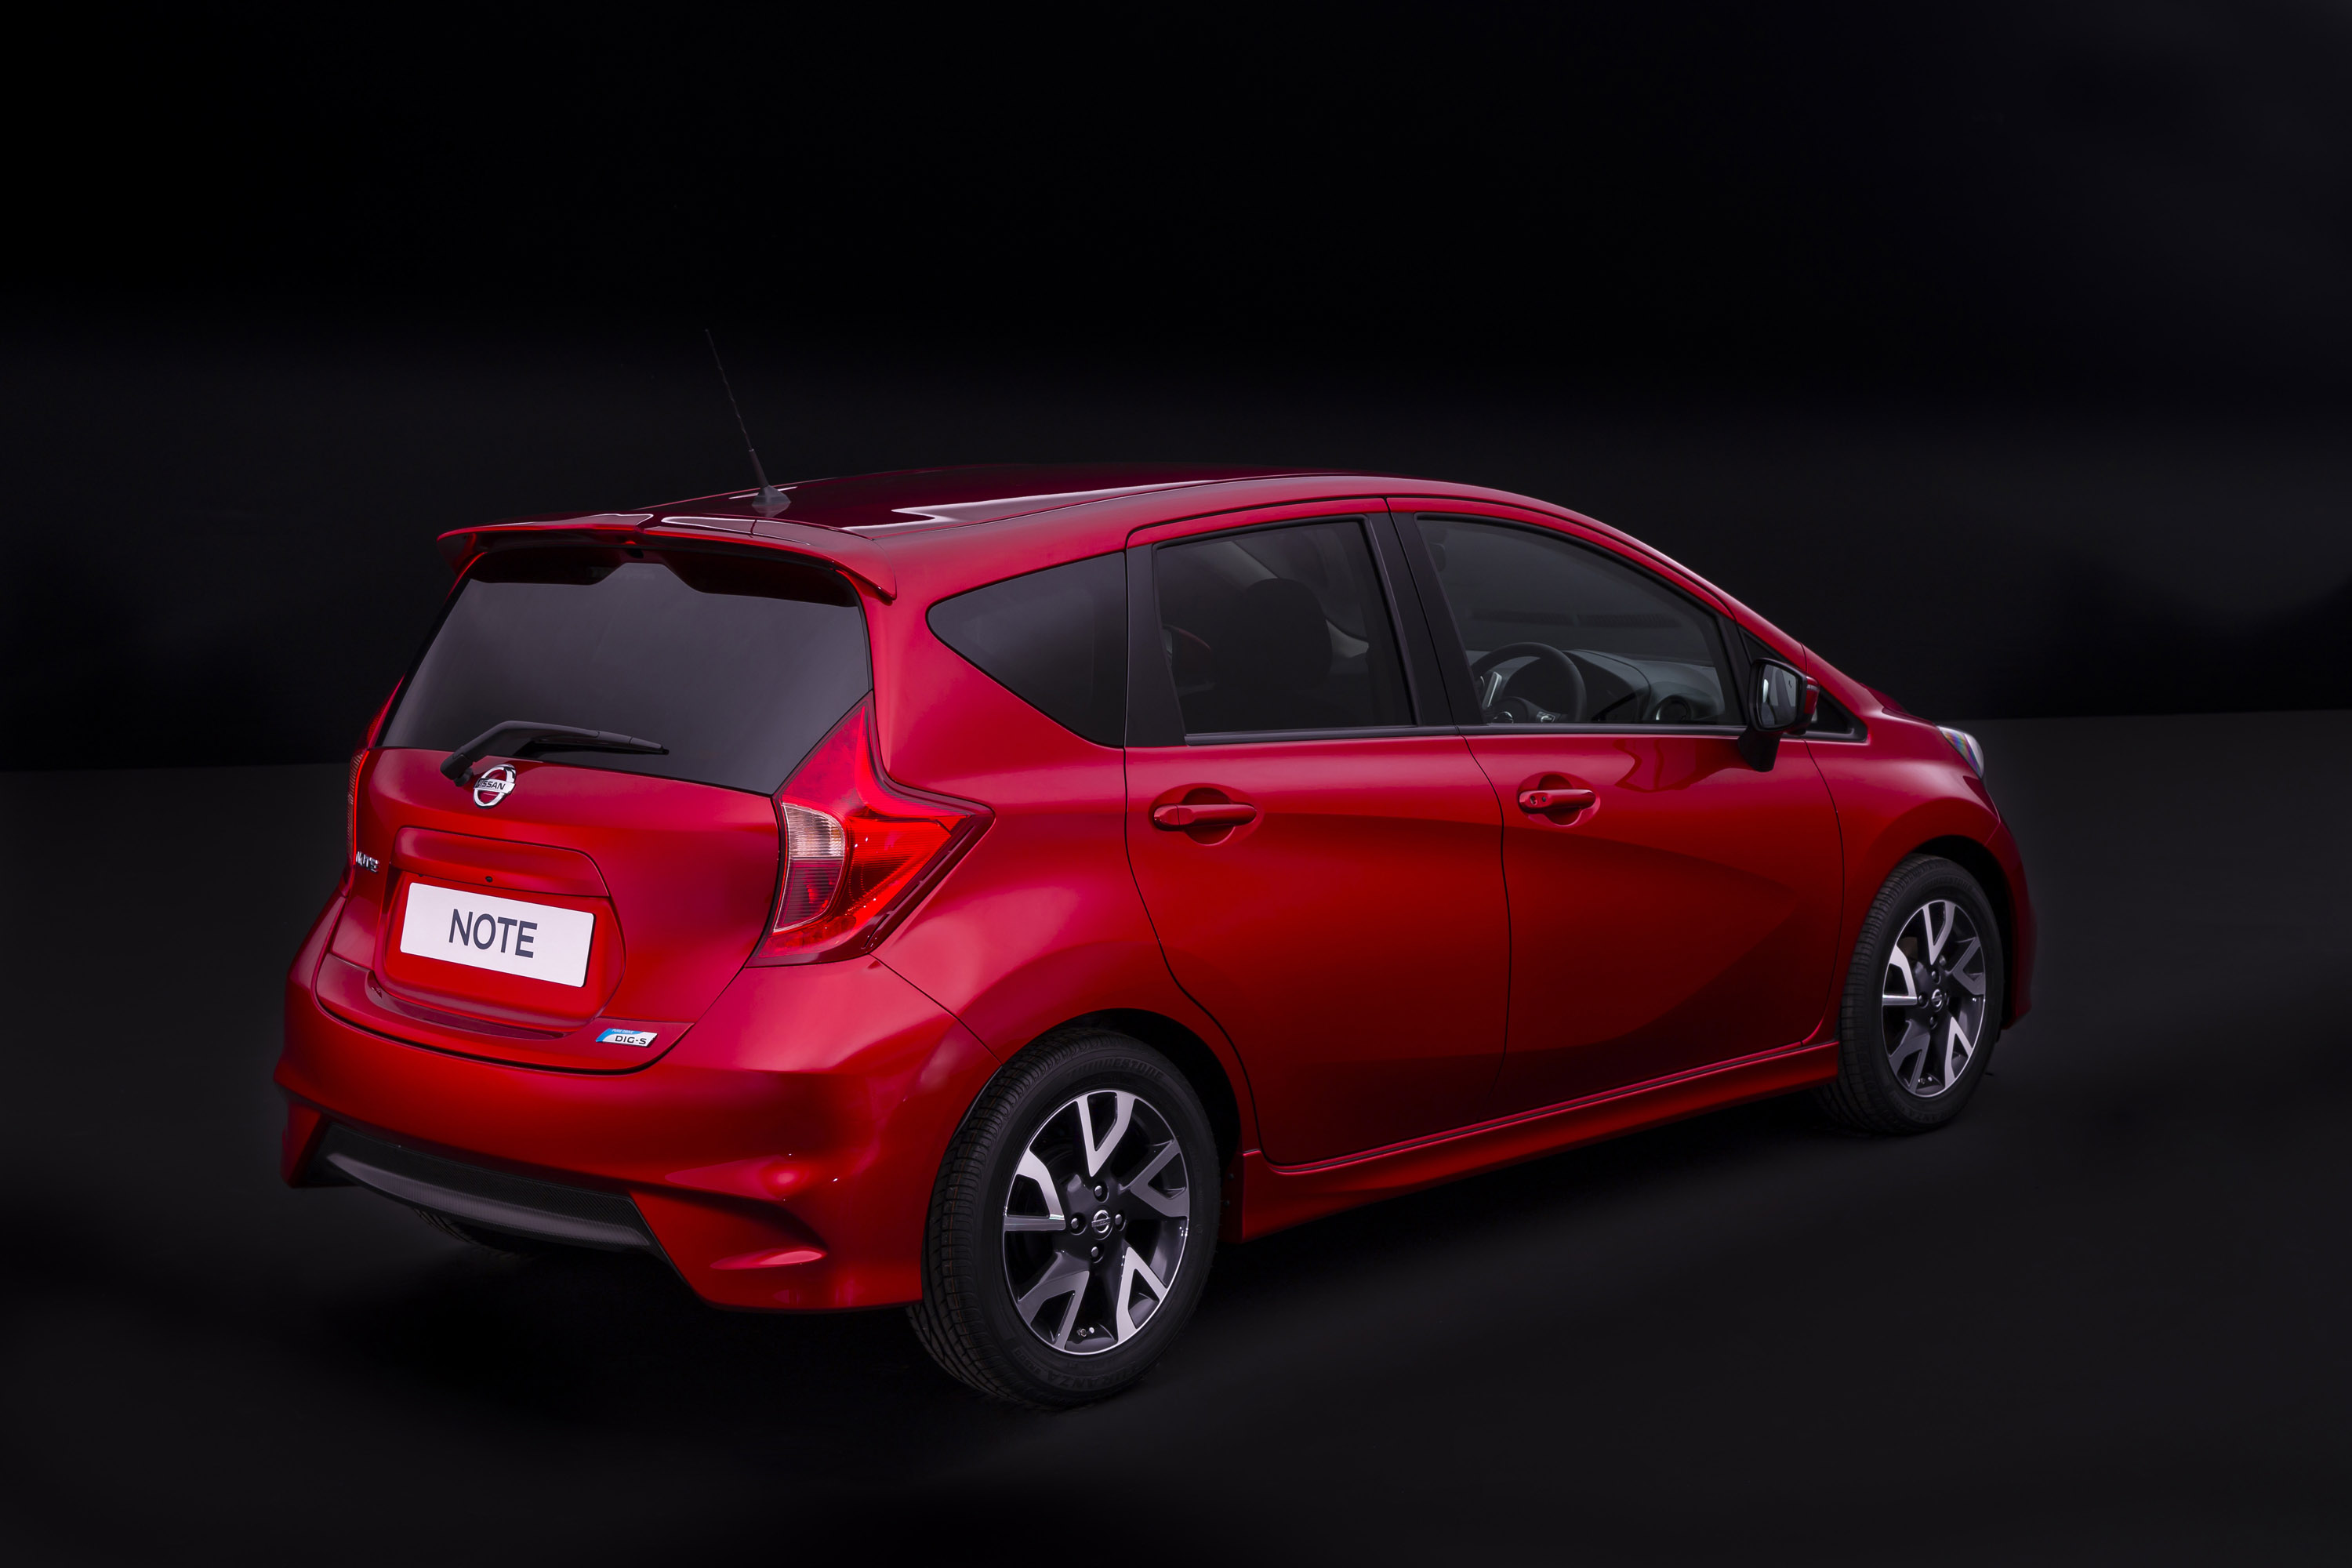 2013 Nissan Note EU Design and Technology Connected